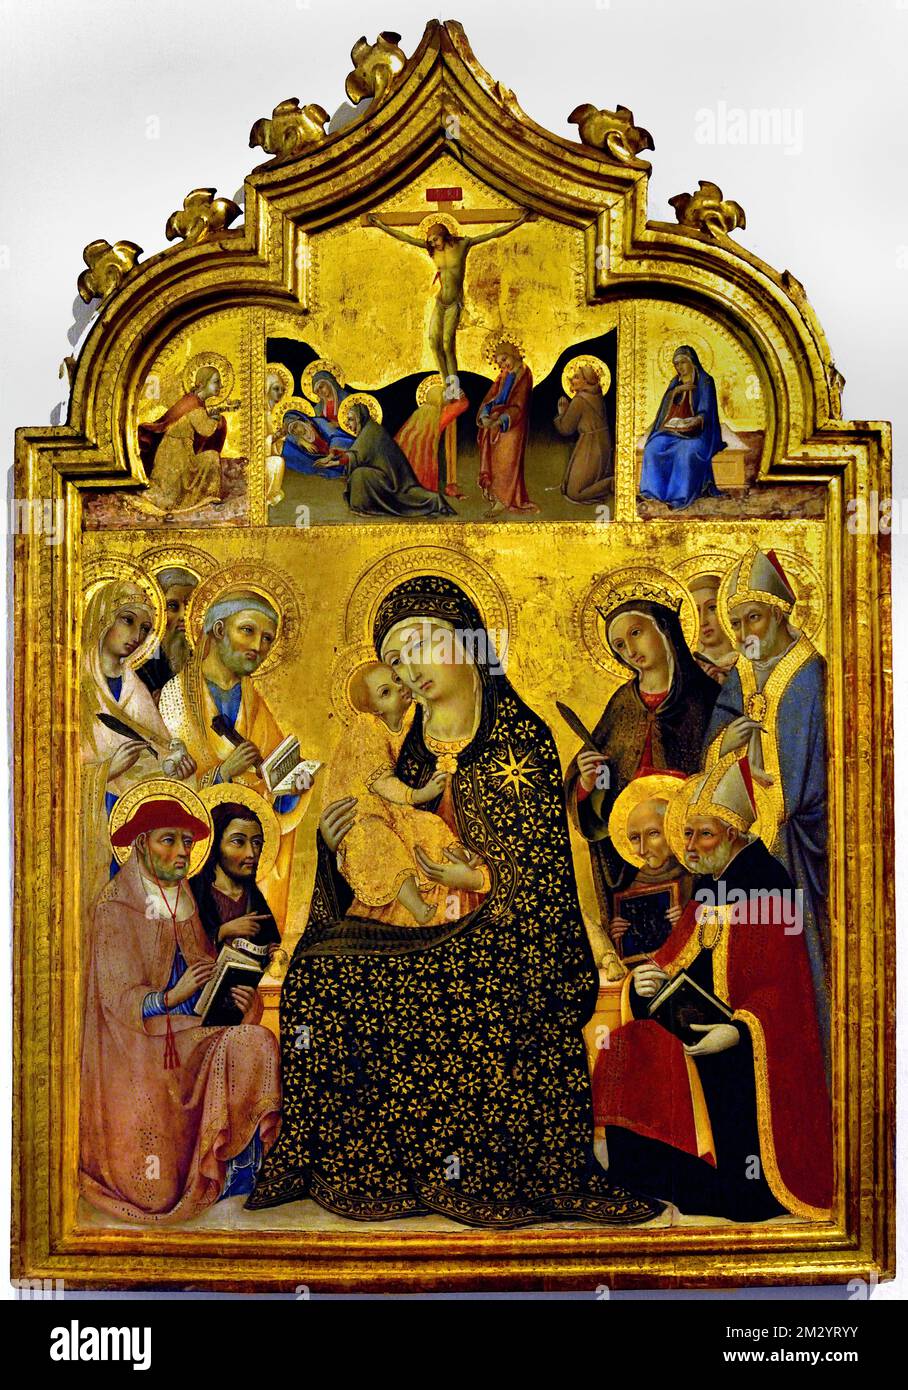 Madonna and Child Enthroned with Saints Agnes, Andrew, Peter, Jerome and John the Baptist, Ambrose, Lawrence, Catherine of Alexandria, Bernardino and Augustine by Sano di Pietro, 1405- 1481, Christian Art, Italy, Italian. Stock Photo